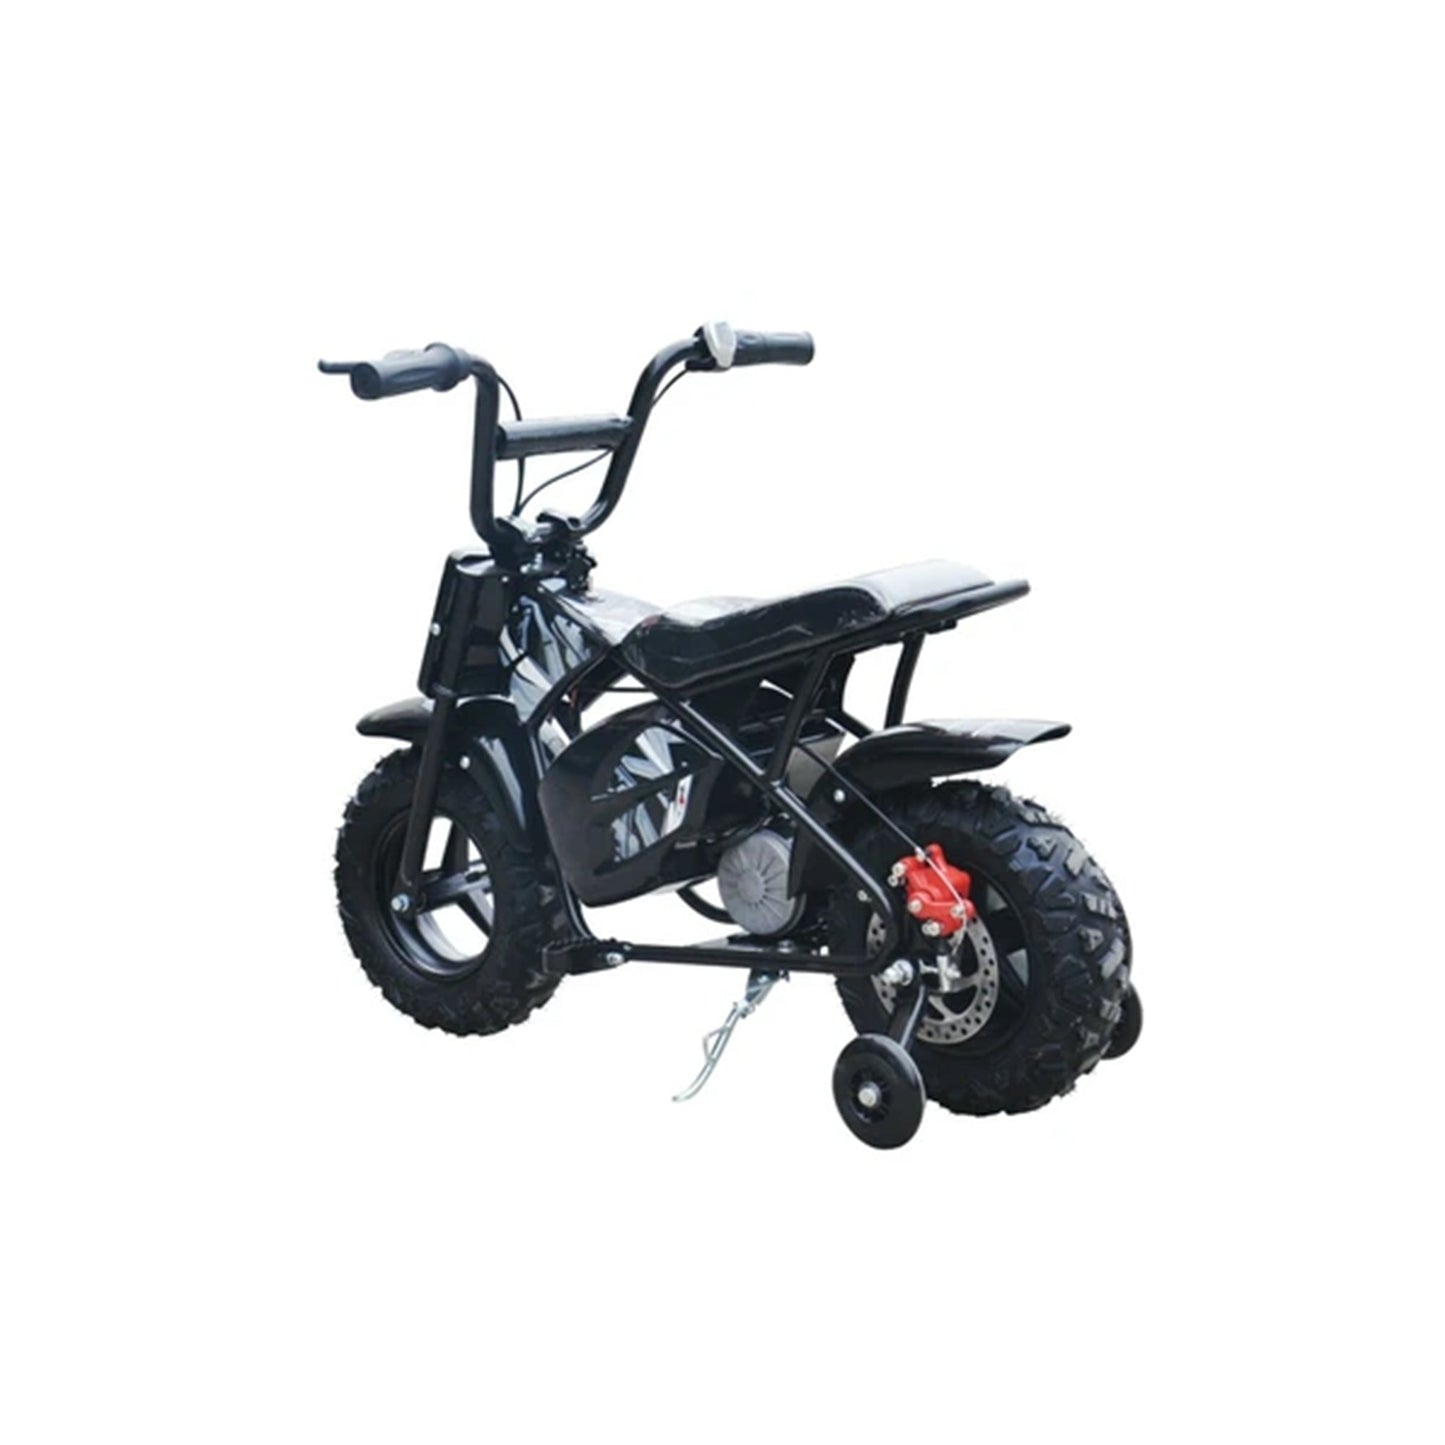 "Small black electric dirt bike for kids with 250 watt-12 volt and twist-and-go throttle, displayed against a pristine white background."